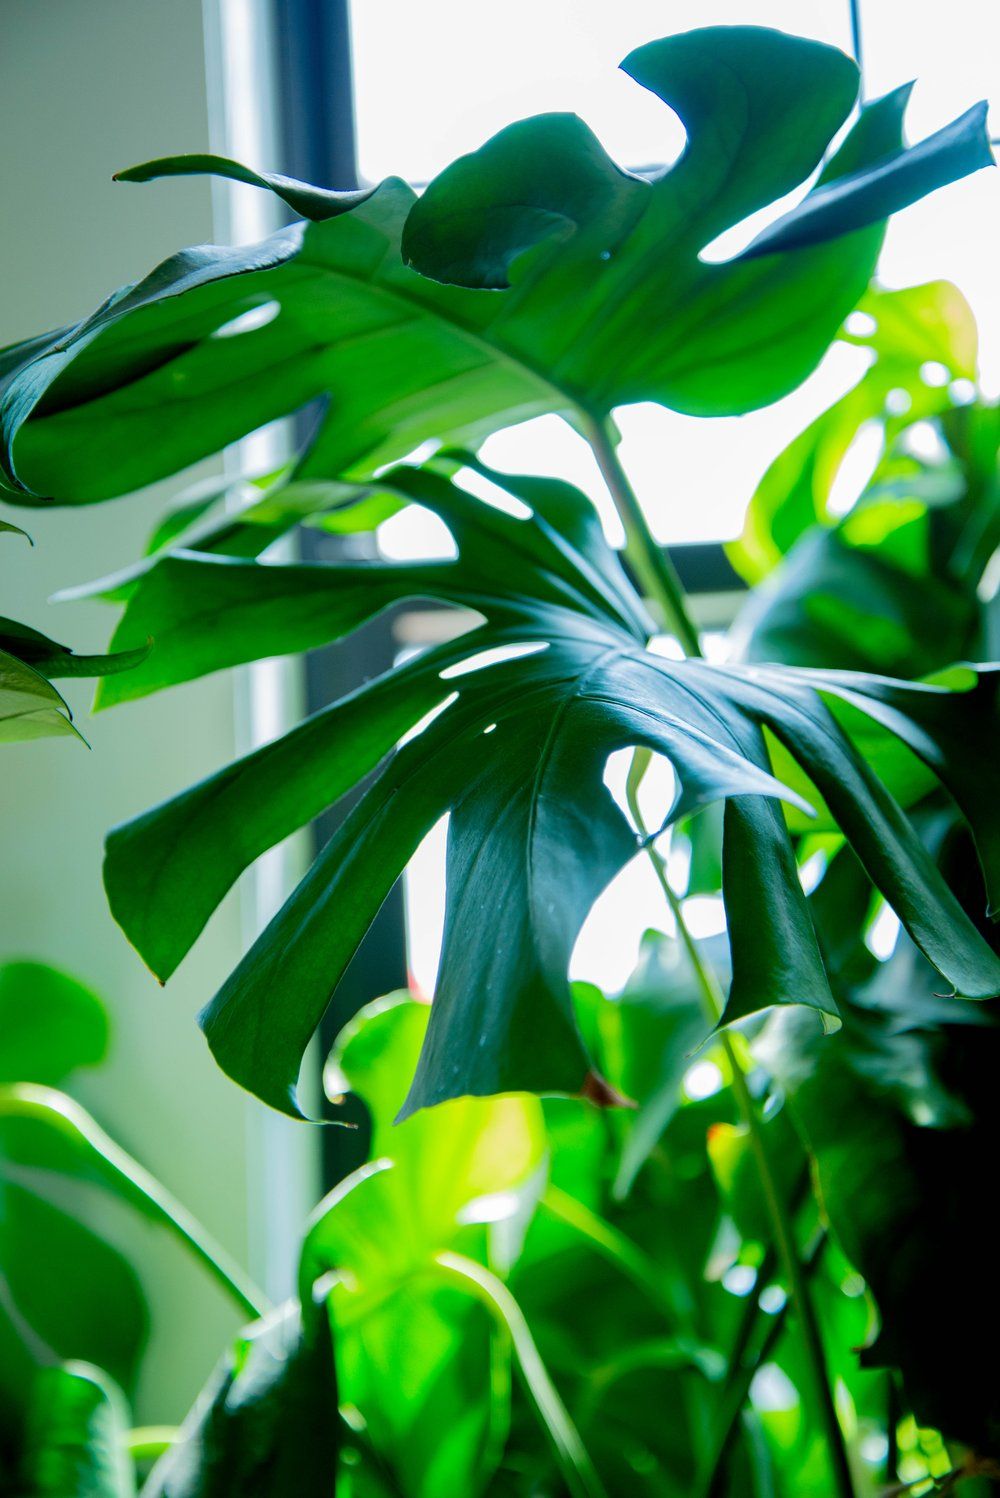 A Monstera deliciosa plant with large leaves. - Monstera